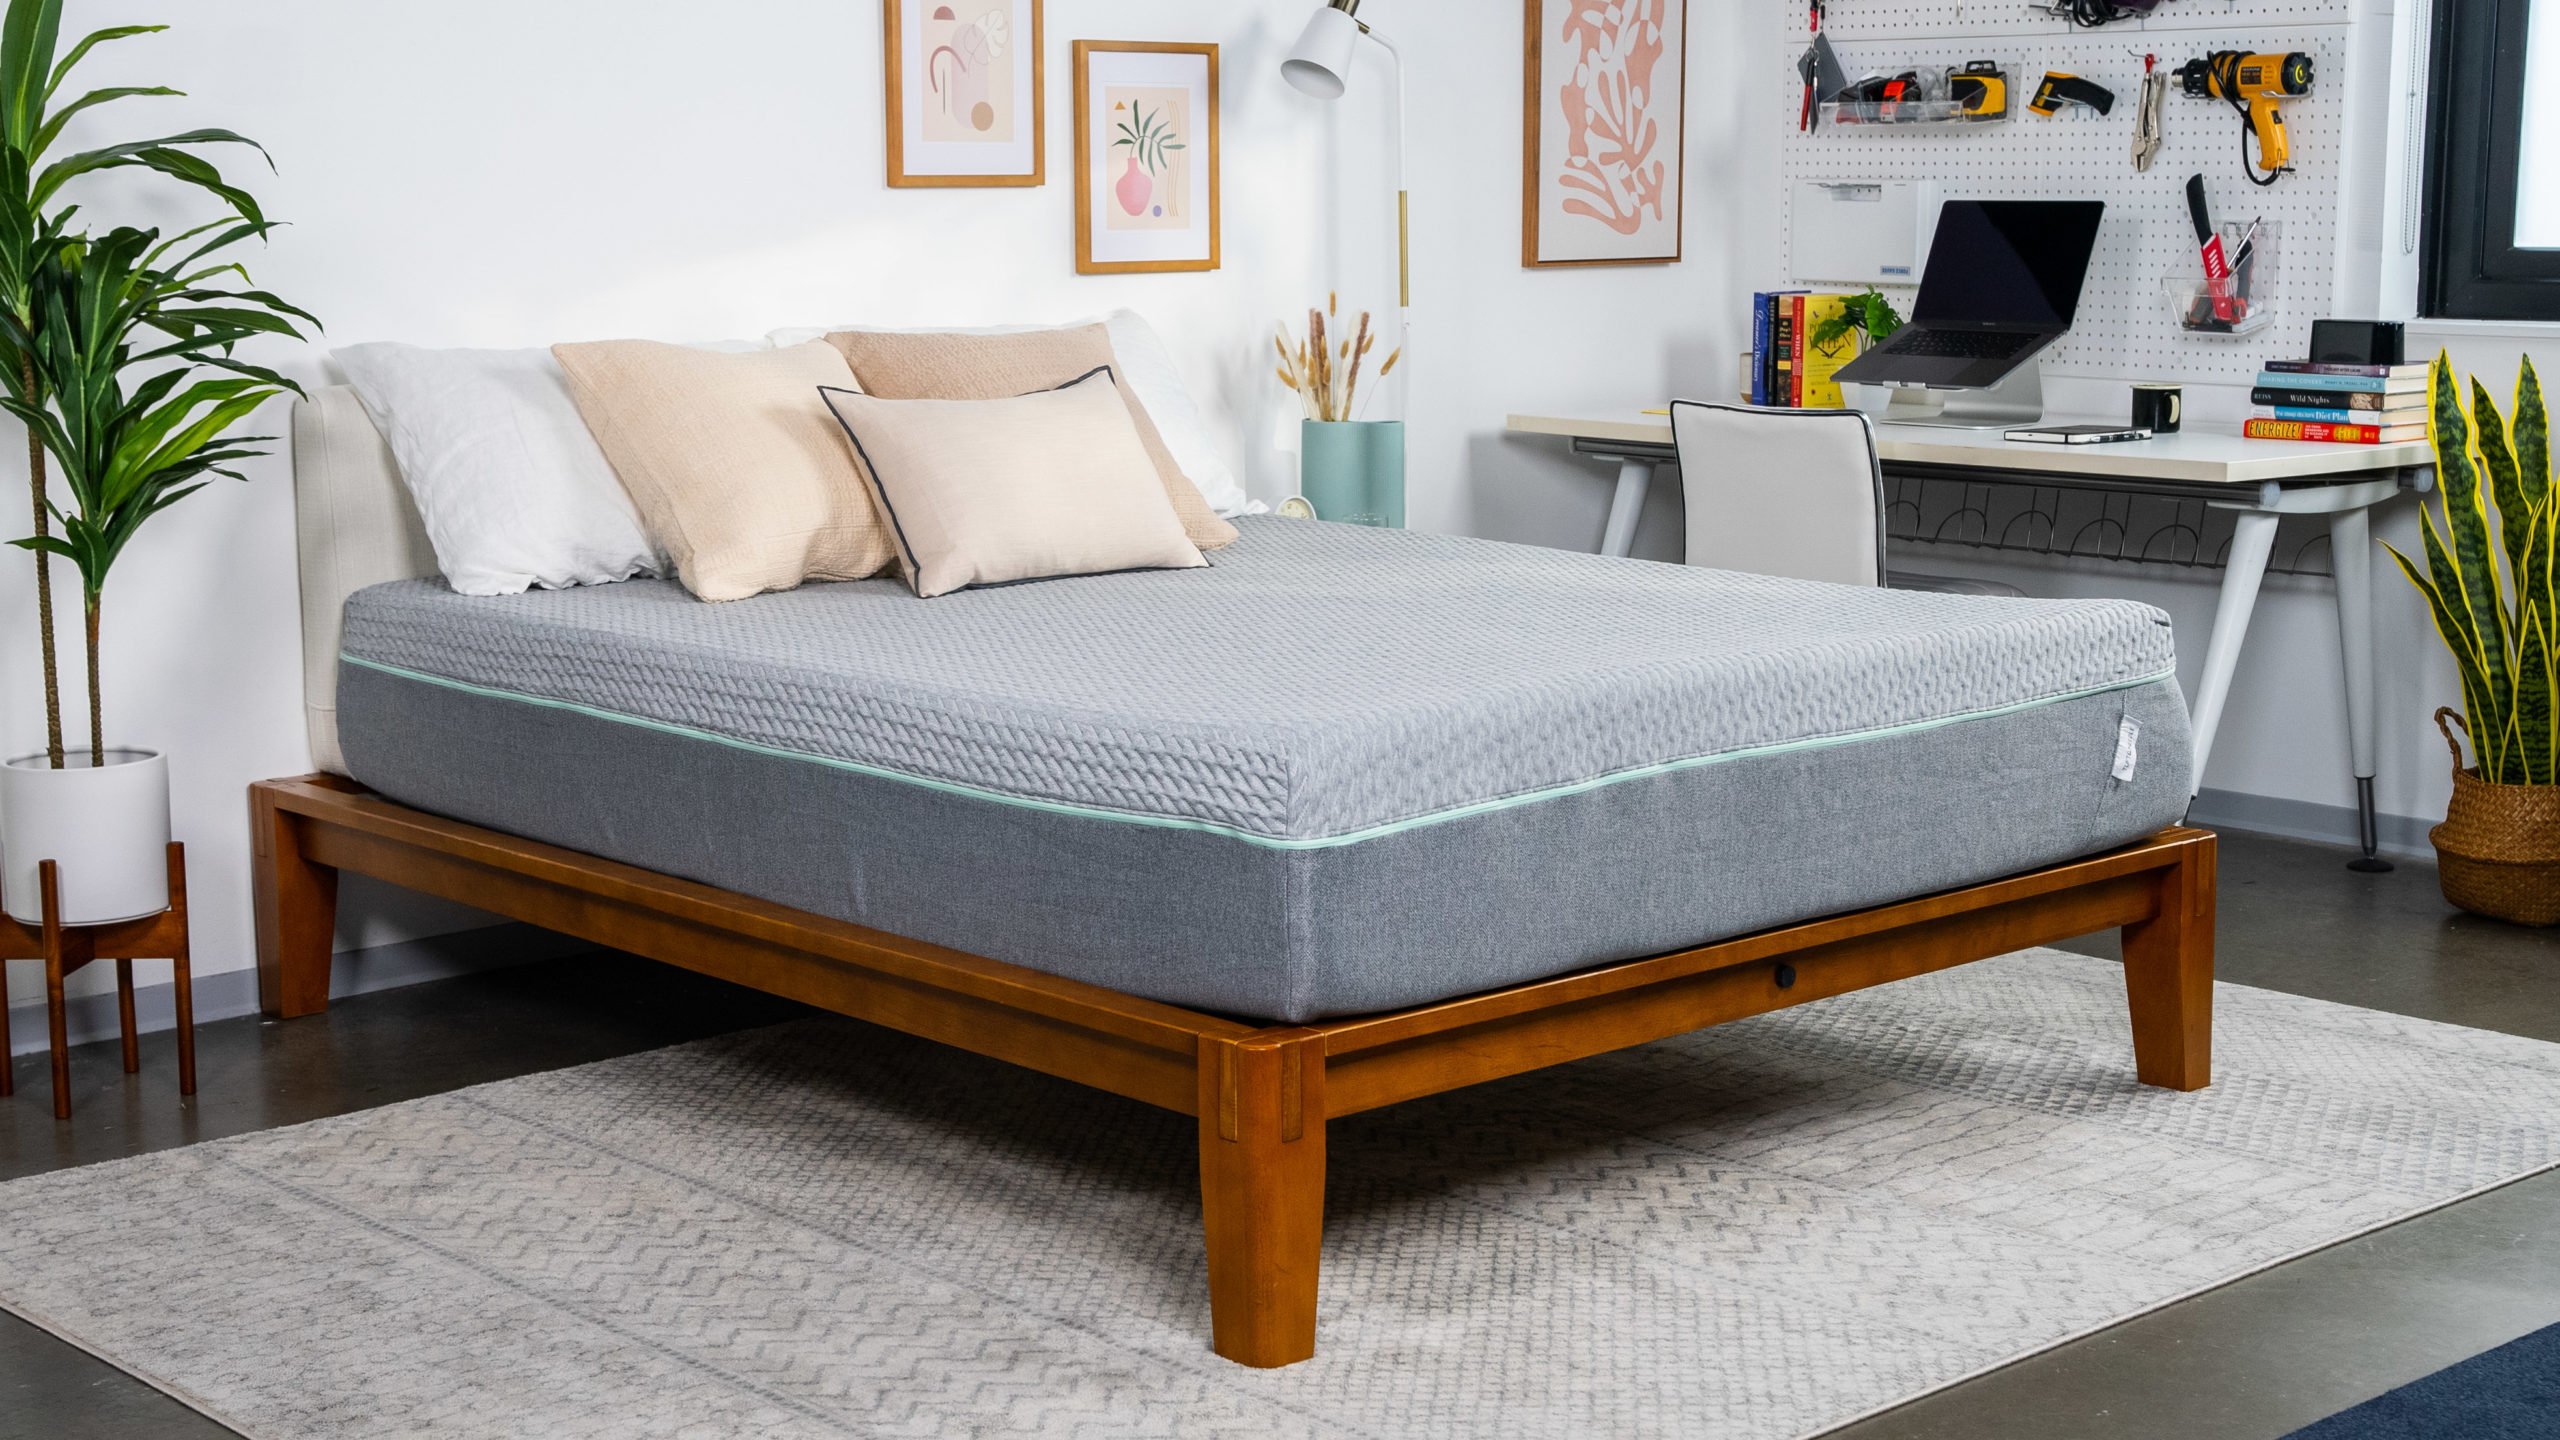 review of tuft & needle mint mattress